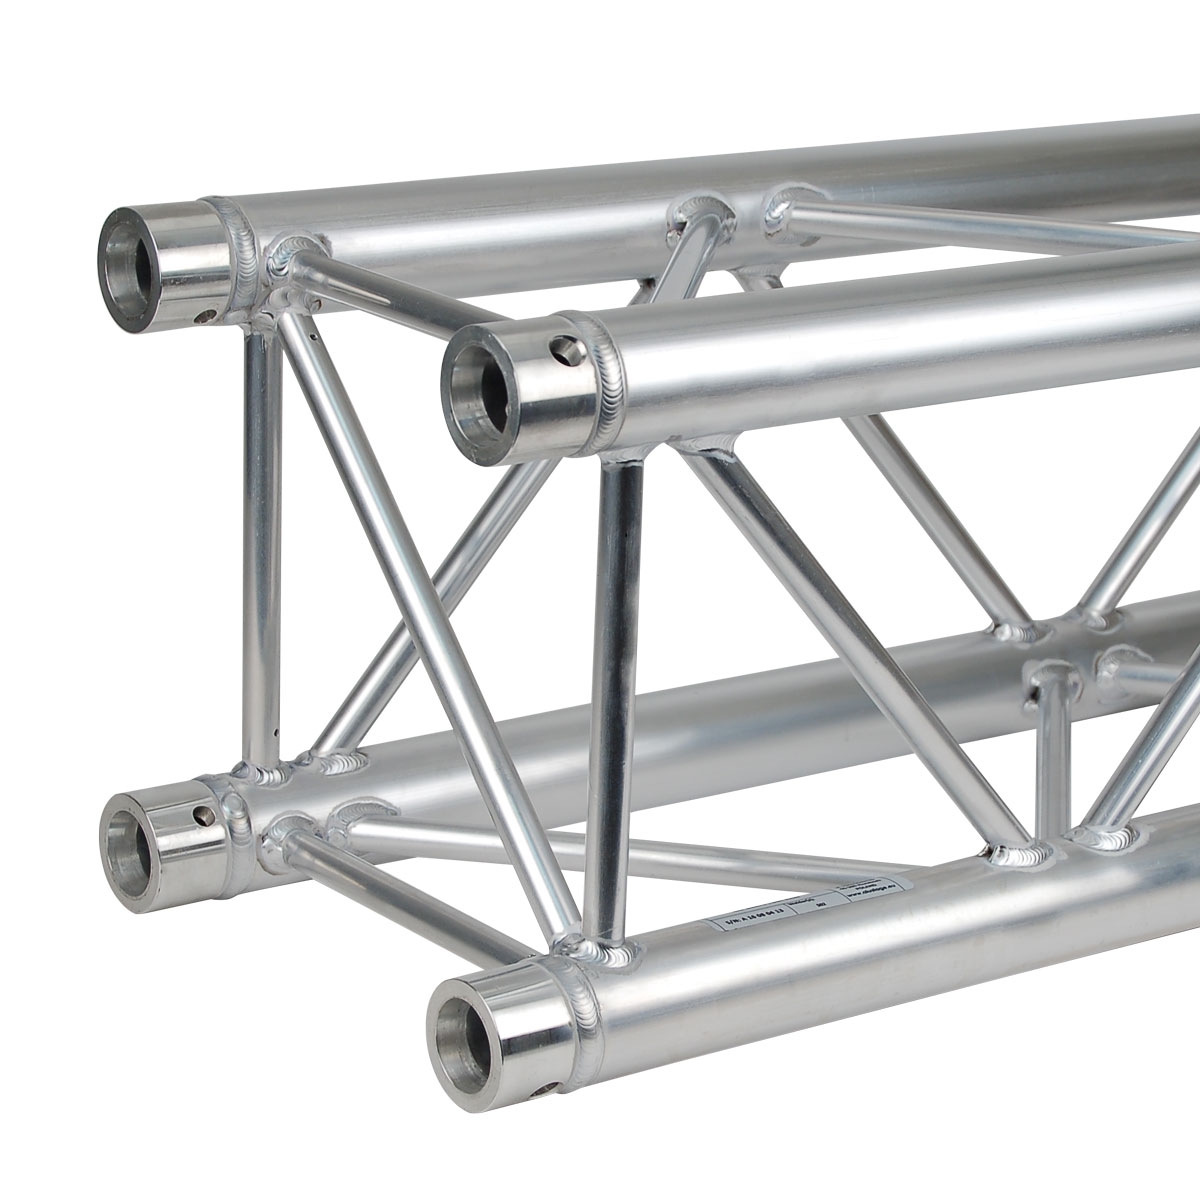 Square aluminium truss - Heavy duty - 290mm - Length 25cm - <strong>Connection kit included</strong>